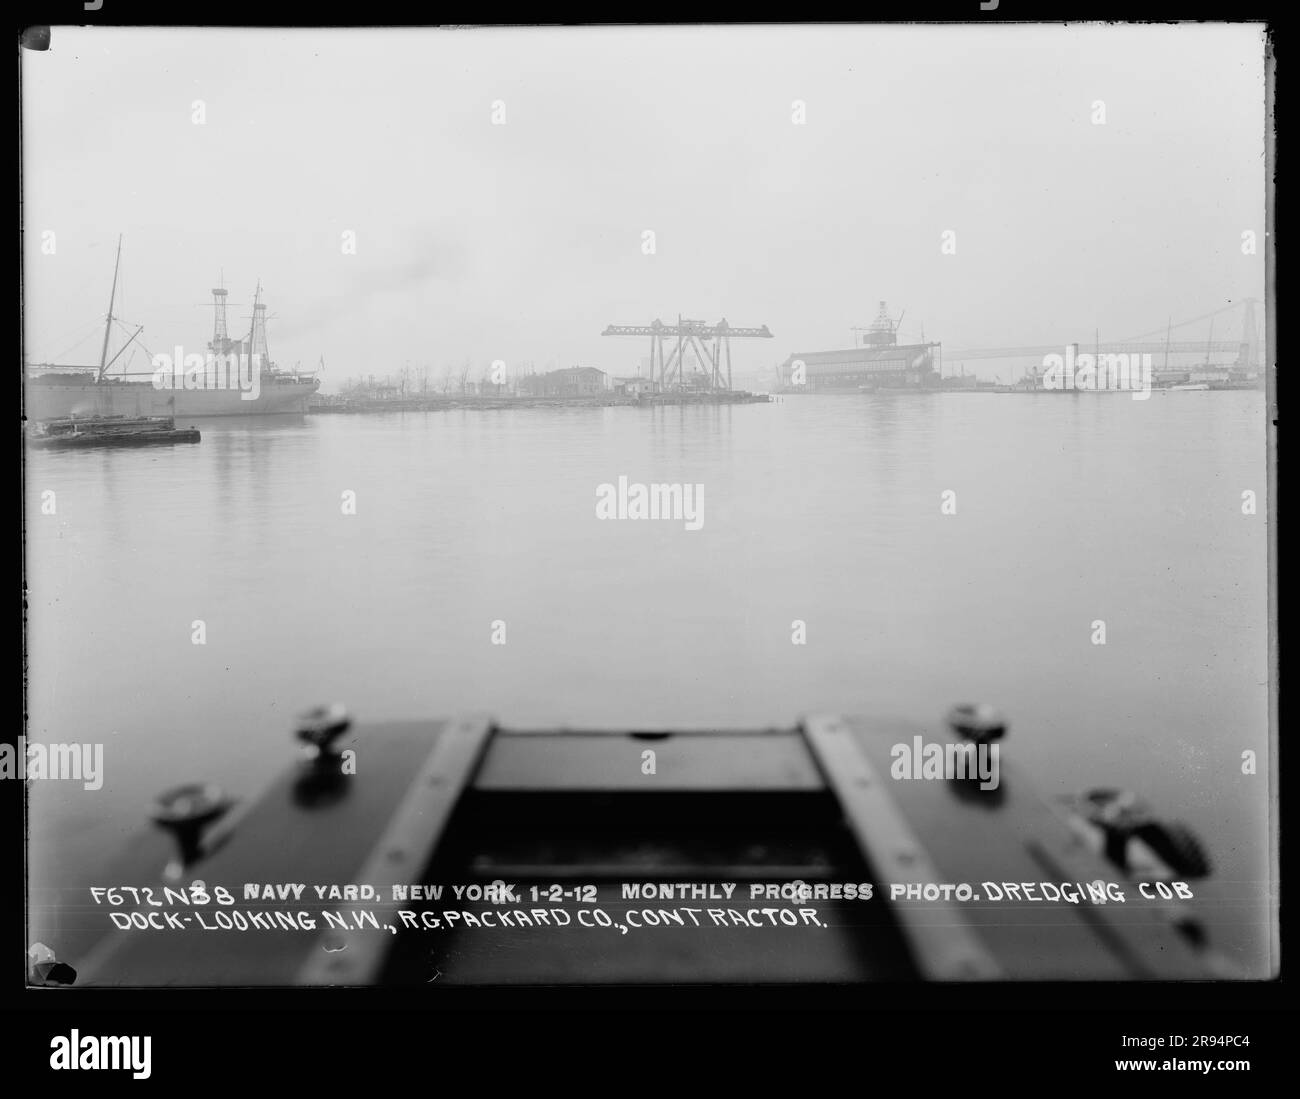 Monthly Progress Photo, Dredging Cob Dock, Looking Northwest, R. G. Packard Company, Contractor. Glass Plate Negatives of the Construction and Repair of Buildings, Facilities, and Vessels at the New York Navy Yard. Stock Photo